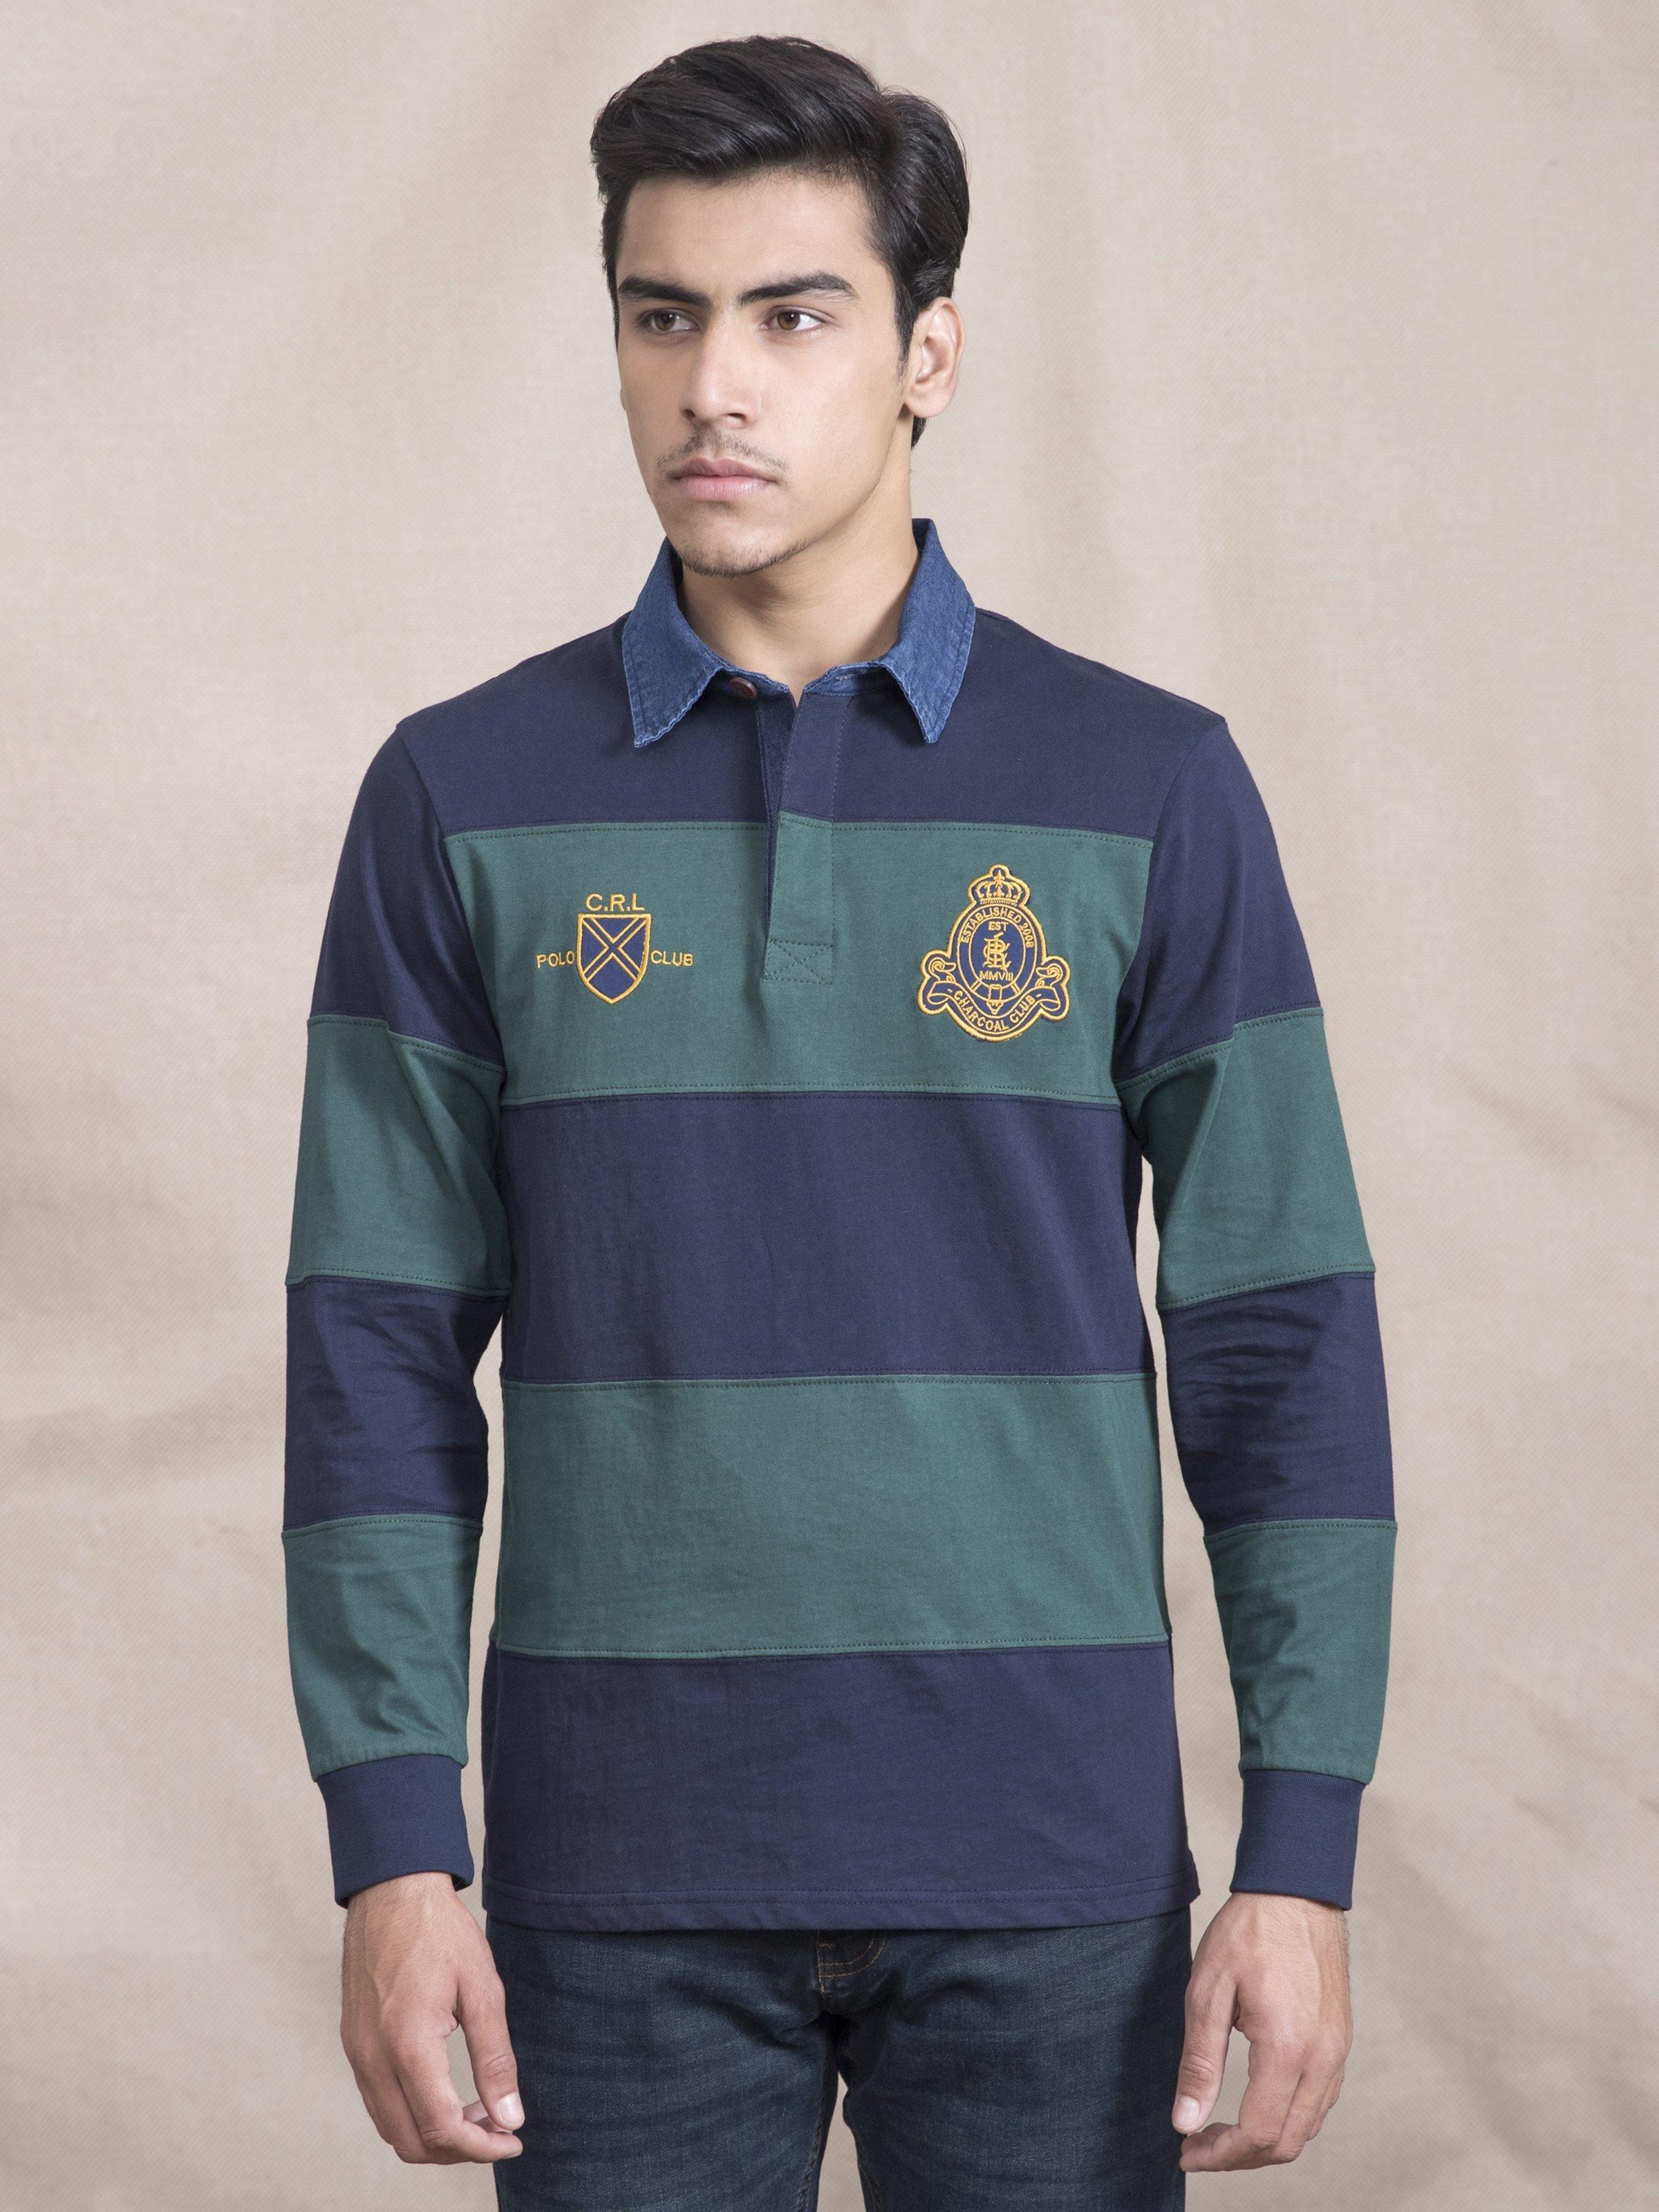 POLO SHIRT RUGBBY DENIM COLLAR GREEN NAVY at Charcoal Clothing